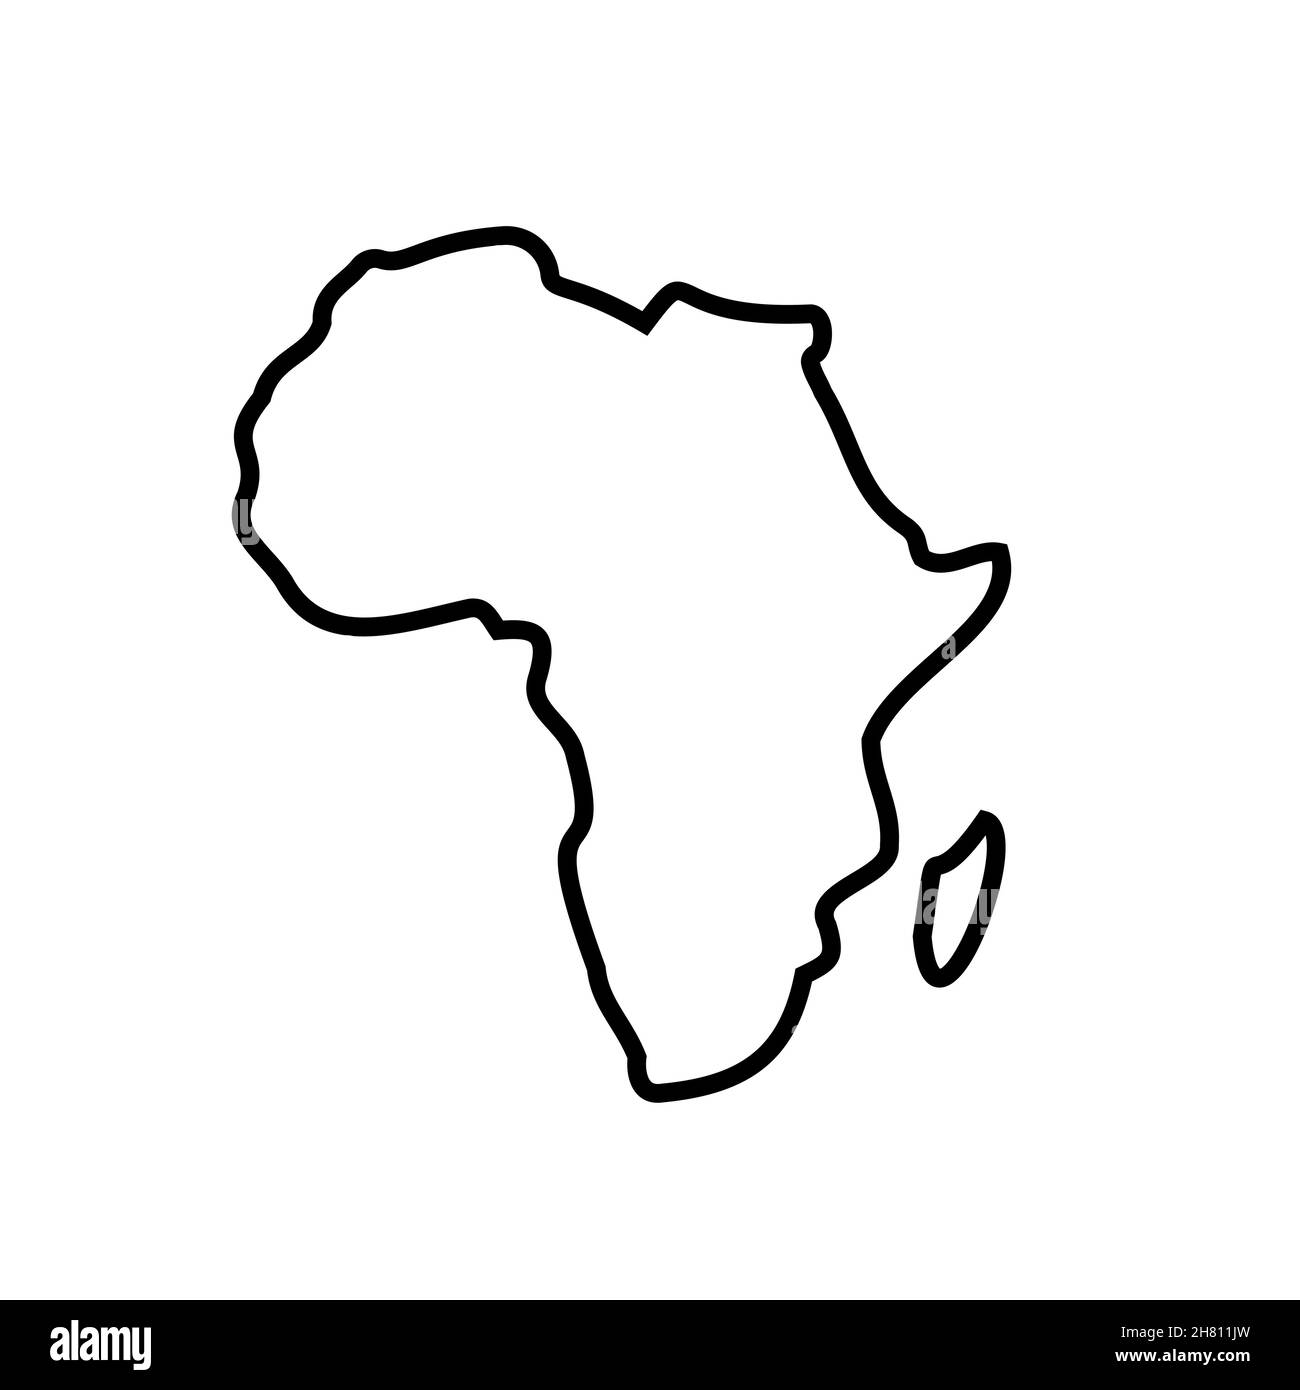 Africa line map vector icon. African outline continent art flat coutour isolated african shape map Stock Vector